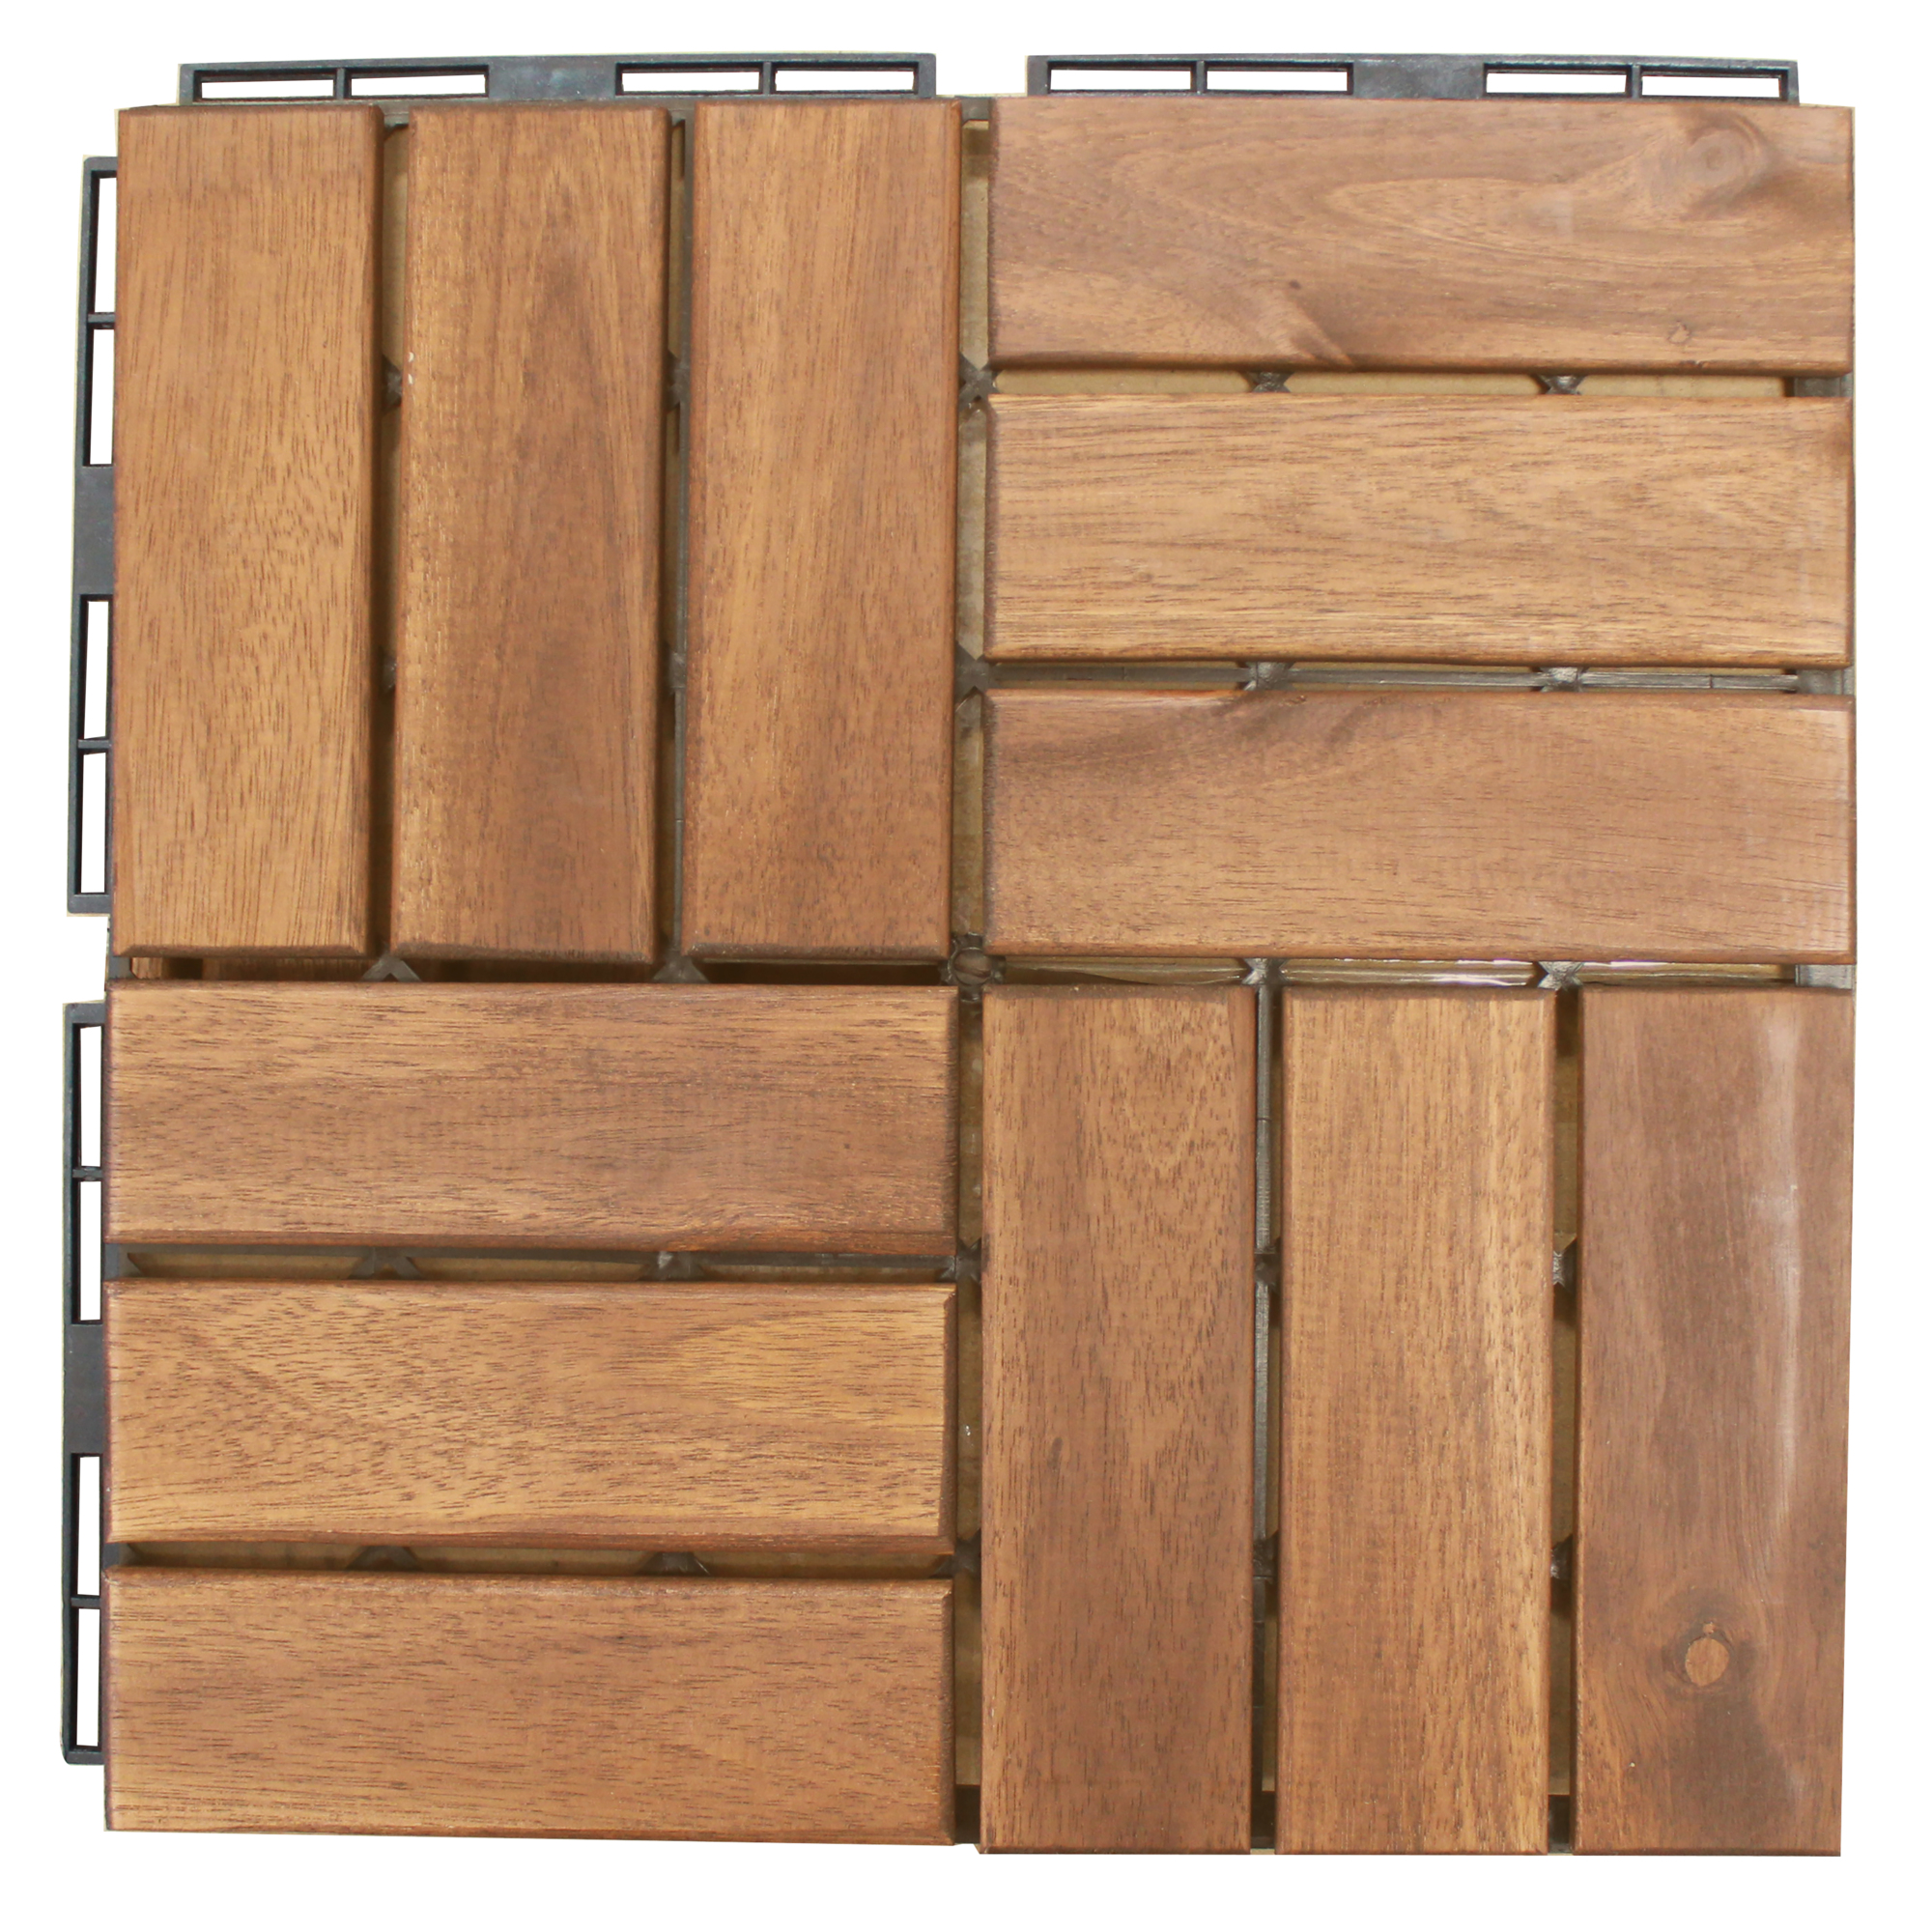 Leigh Country, 10-PK Wood Flooring - Parque, Model SL 08000